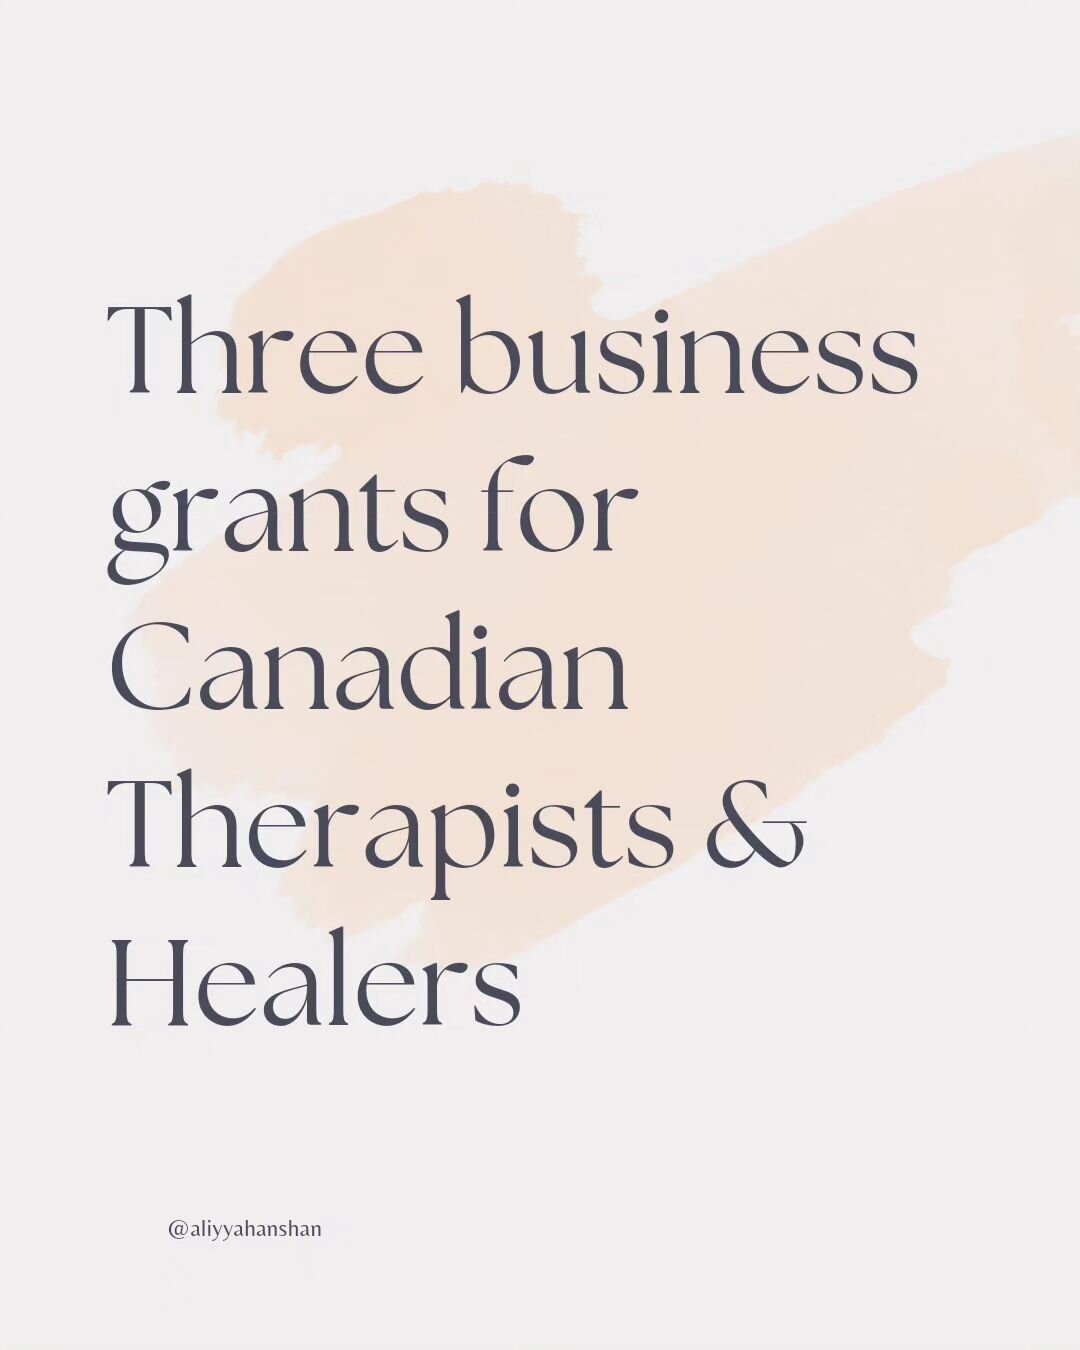 If you're a mental health therapist or practitioner in the health and healing space, there are three grant programs available to you that provide training and funding for your business. Each comes with their pros and cons. The BEST part is that funds